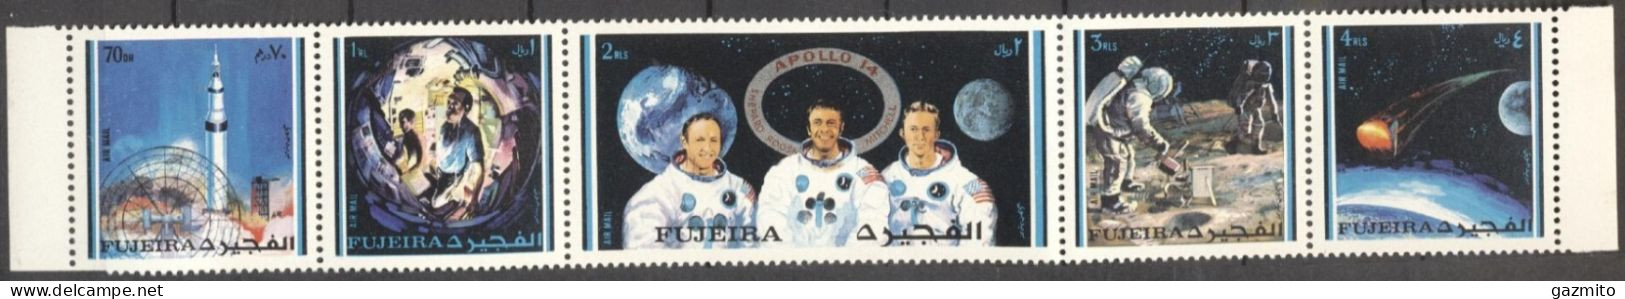 Fujeira 1971, Space, First Man On The Moon, 5val. - Fudschaira